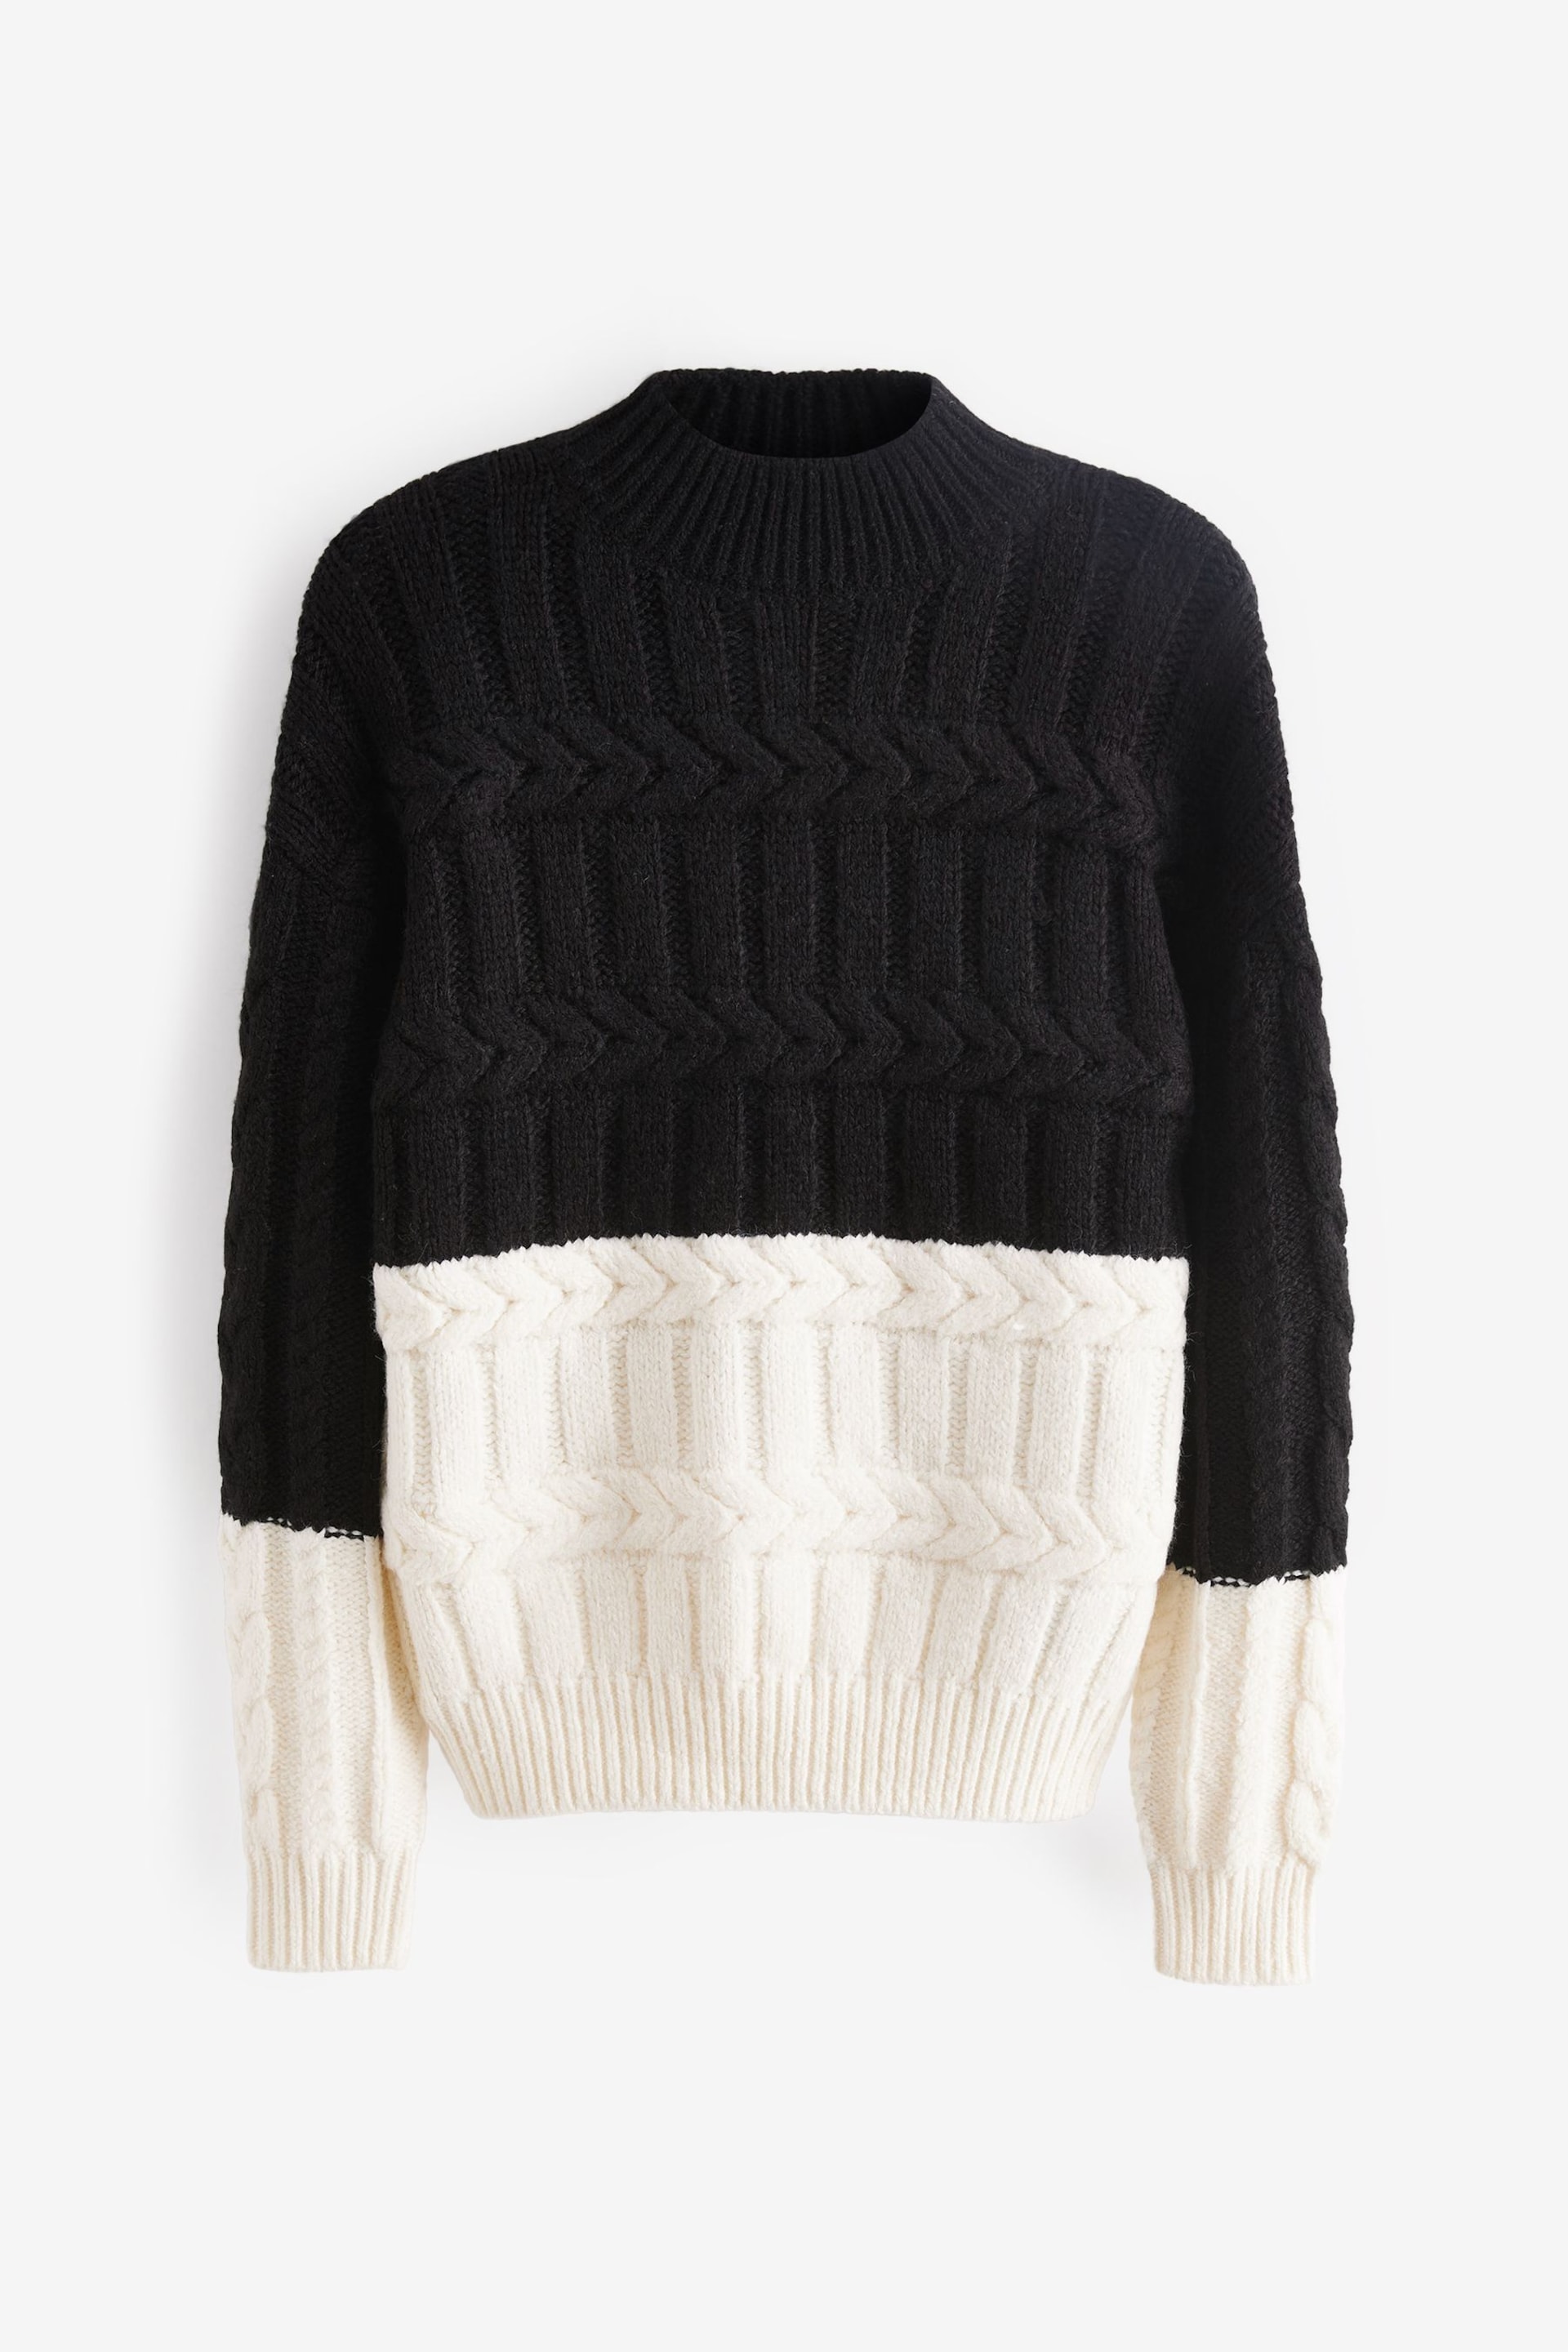 Black/White Colourblock Cable Detail High Neck Jumper - Image 5 of 8